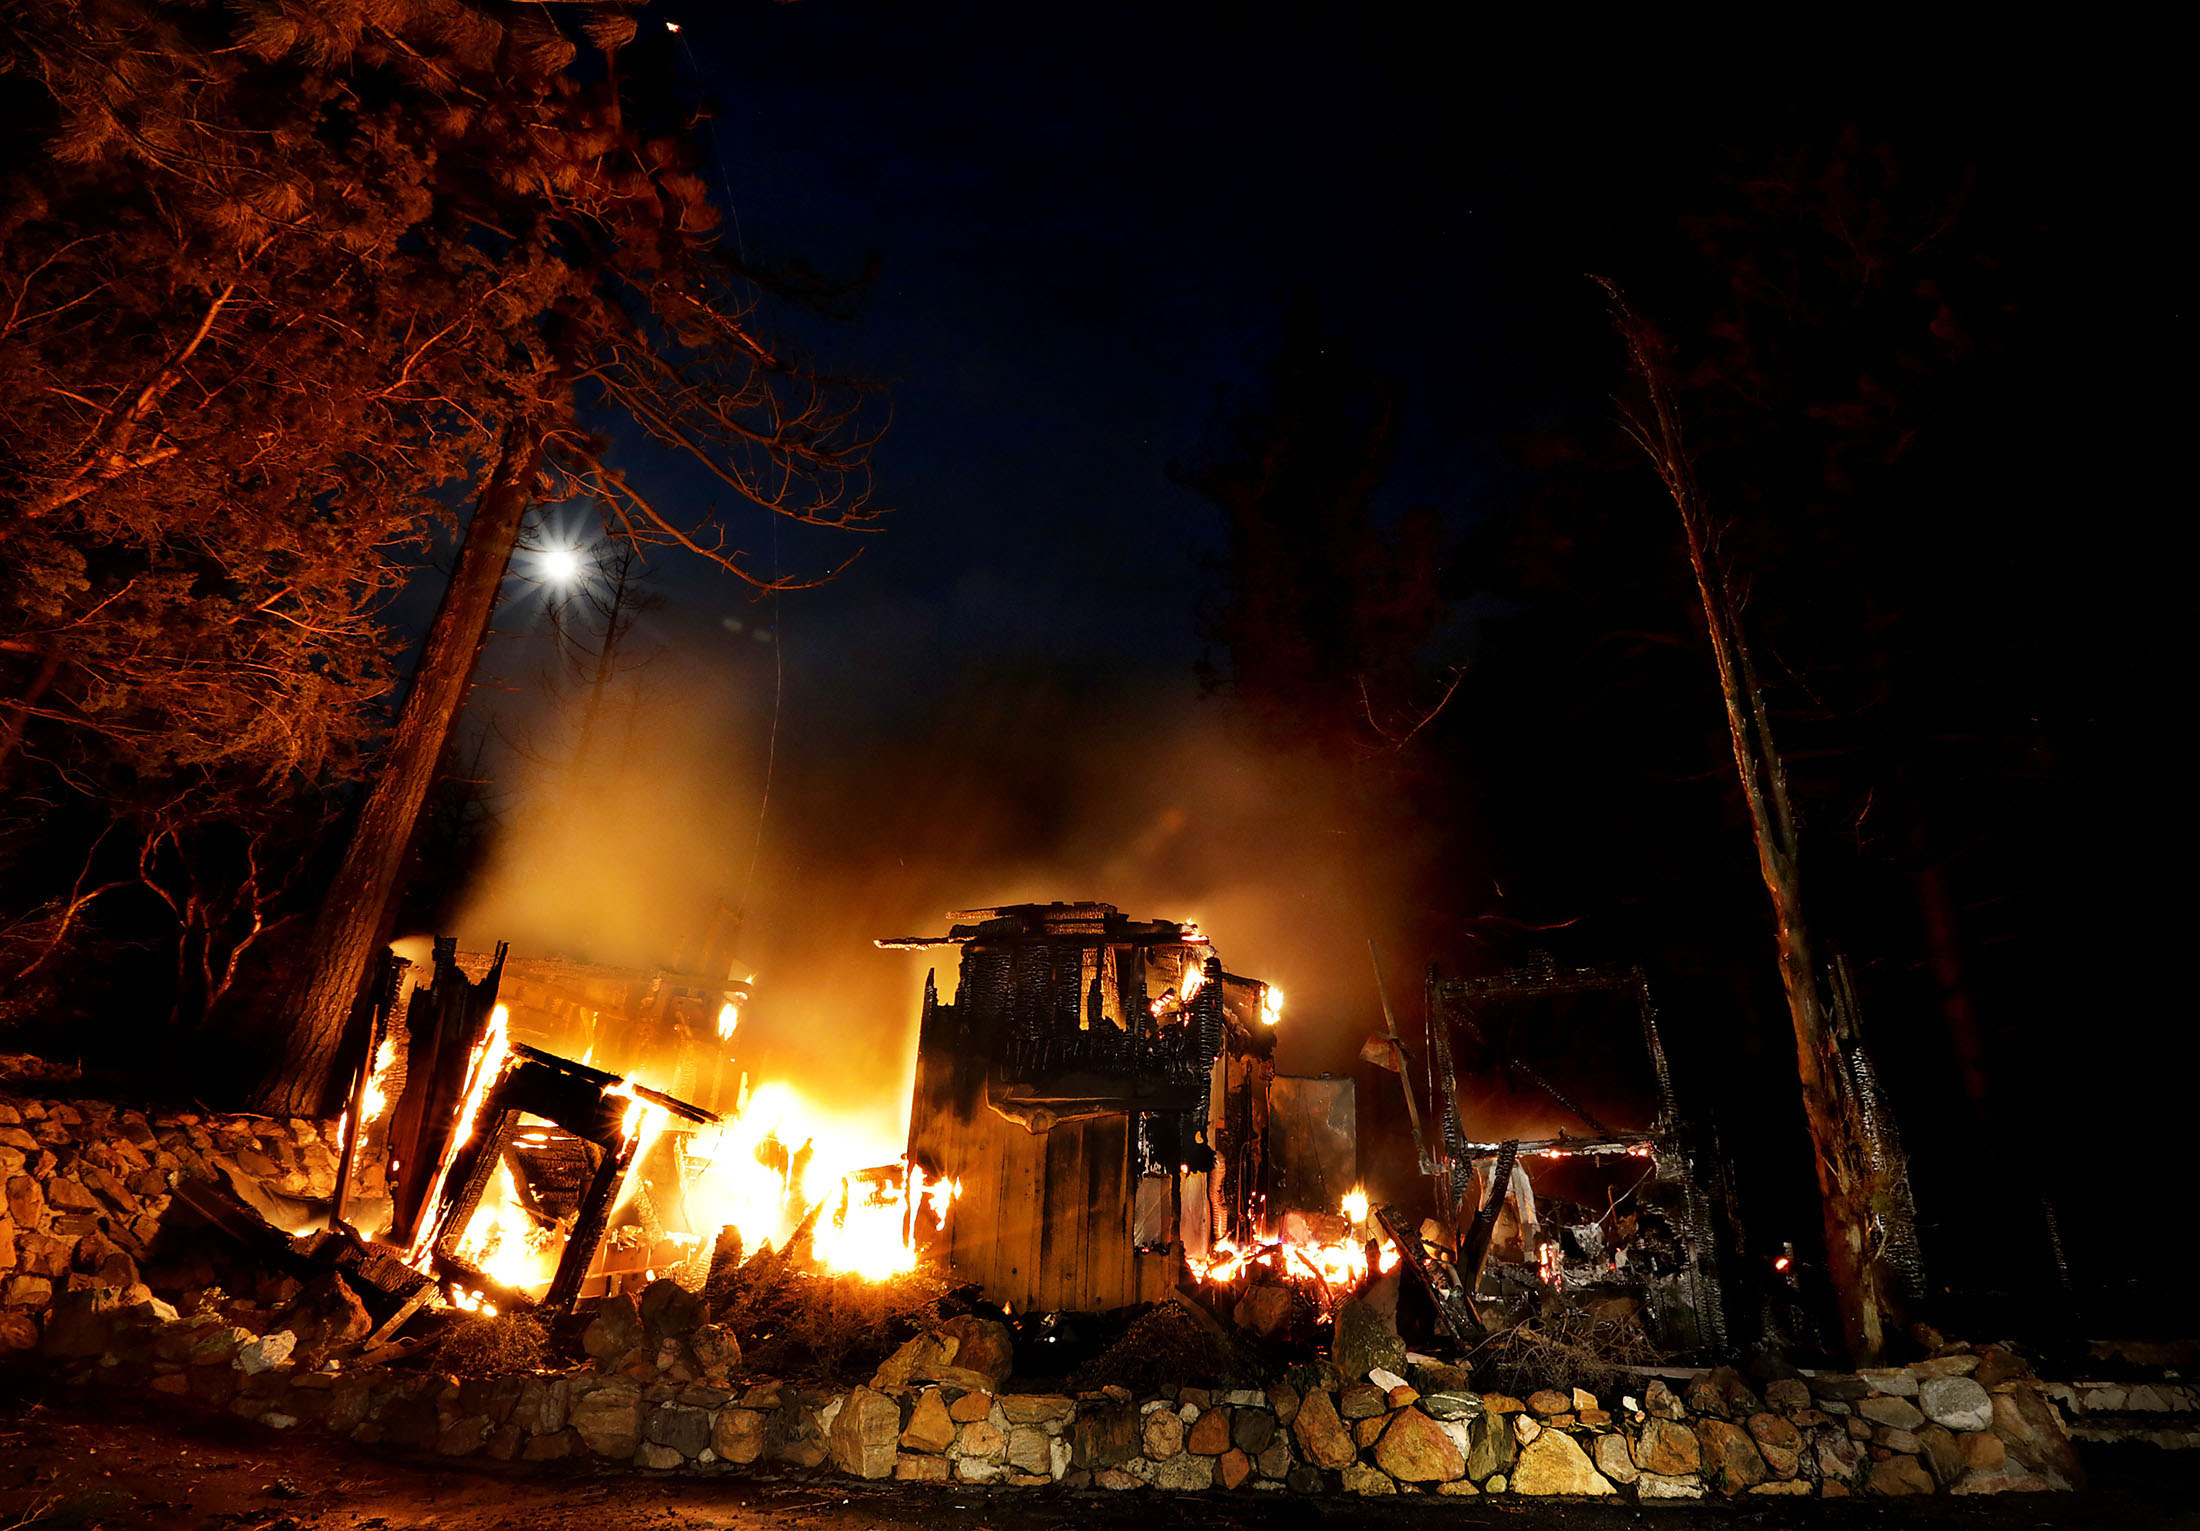  A home on Deer Foot Lane burns into the night on Deer Foot Lane as the Cranston fire slows in the cool night air after during more than 3,500 acres in the San Bernardino National Forest in Idyllwild on Wednesday, July 25, 2018.  